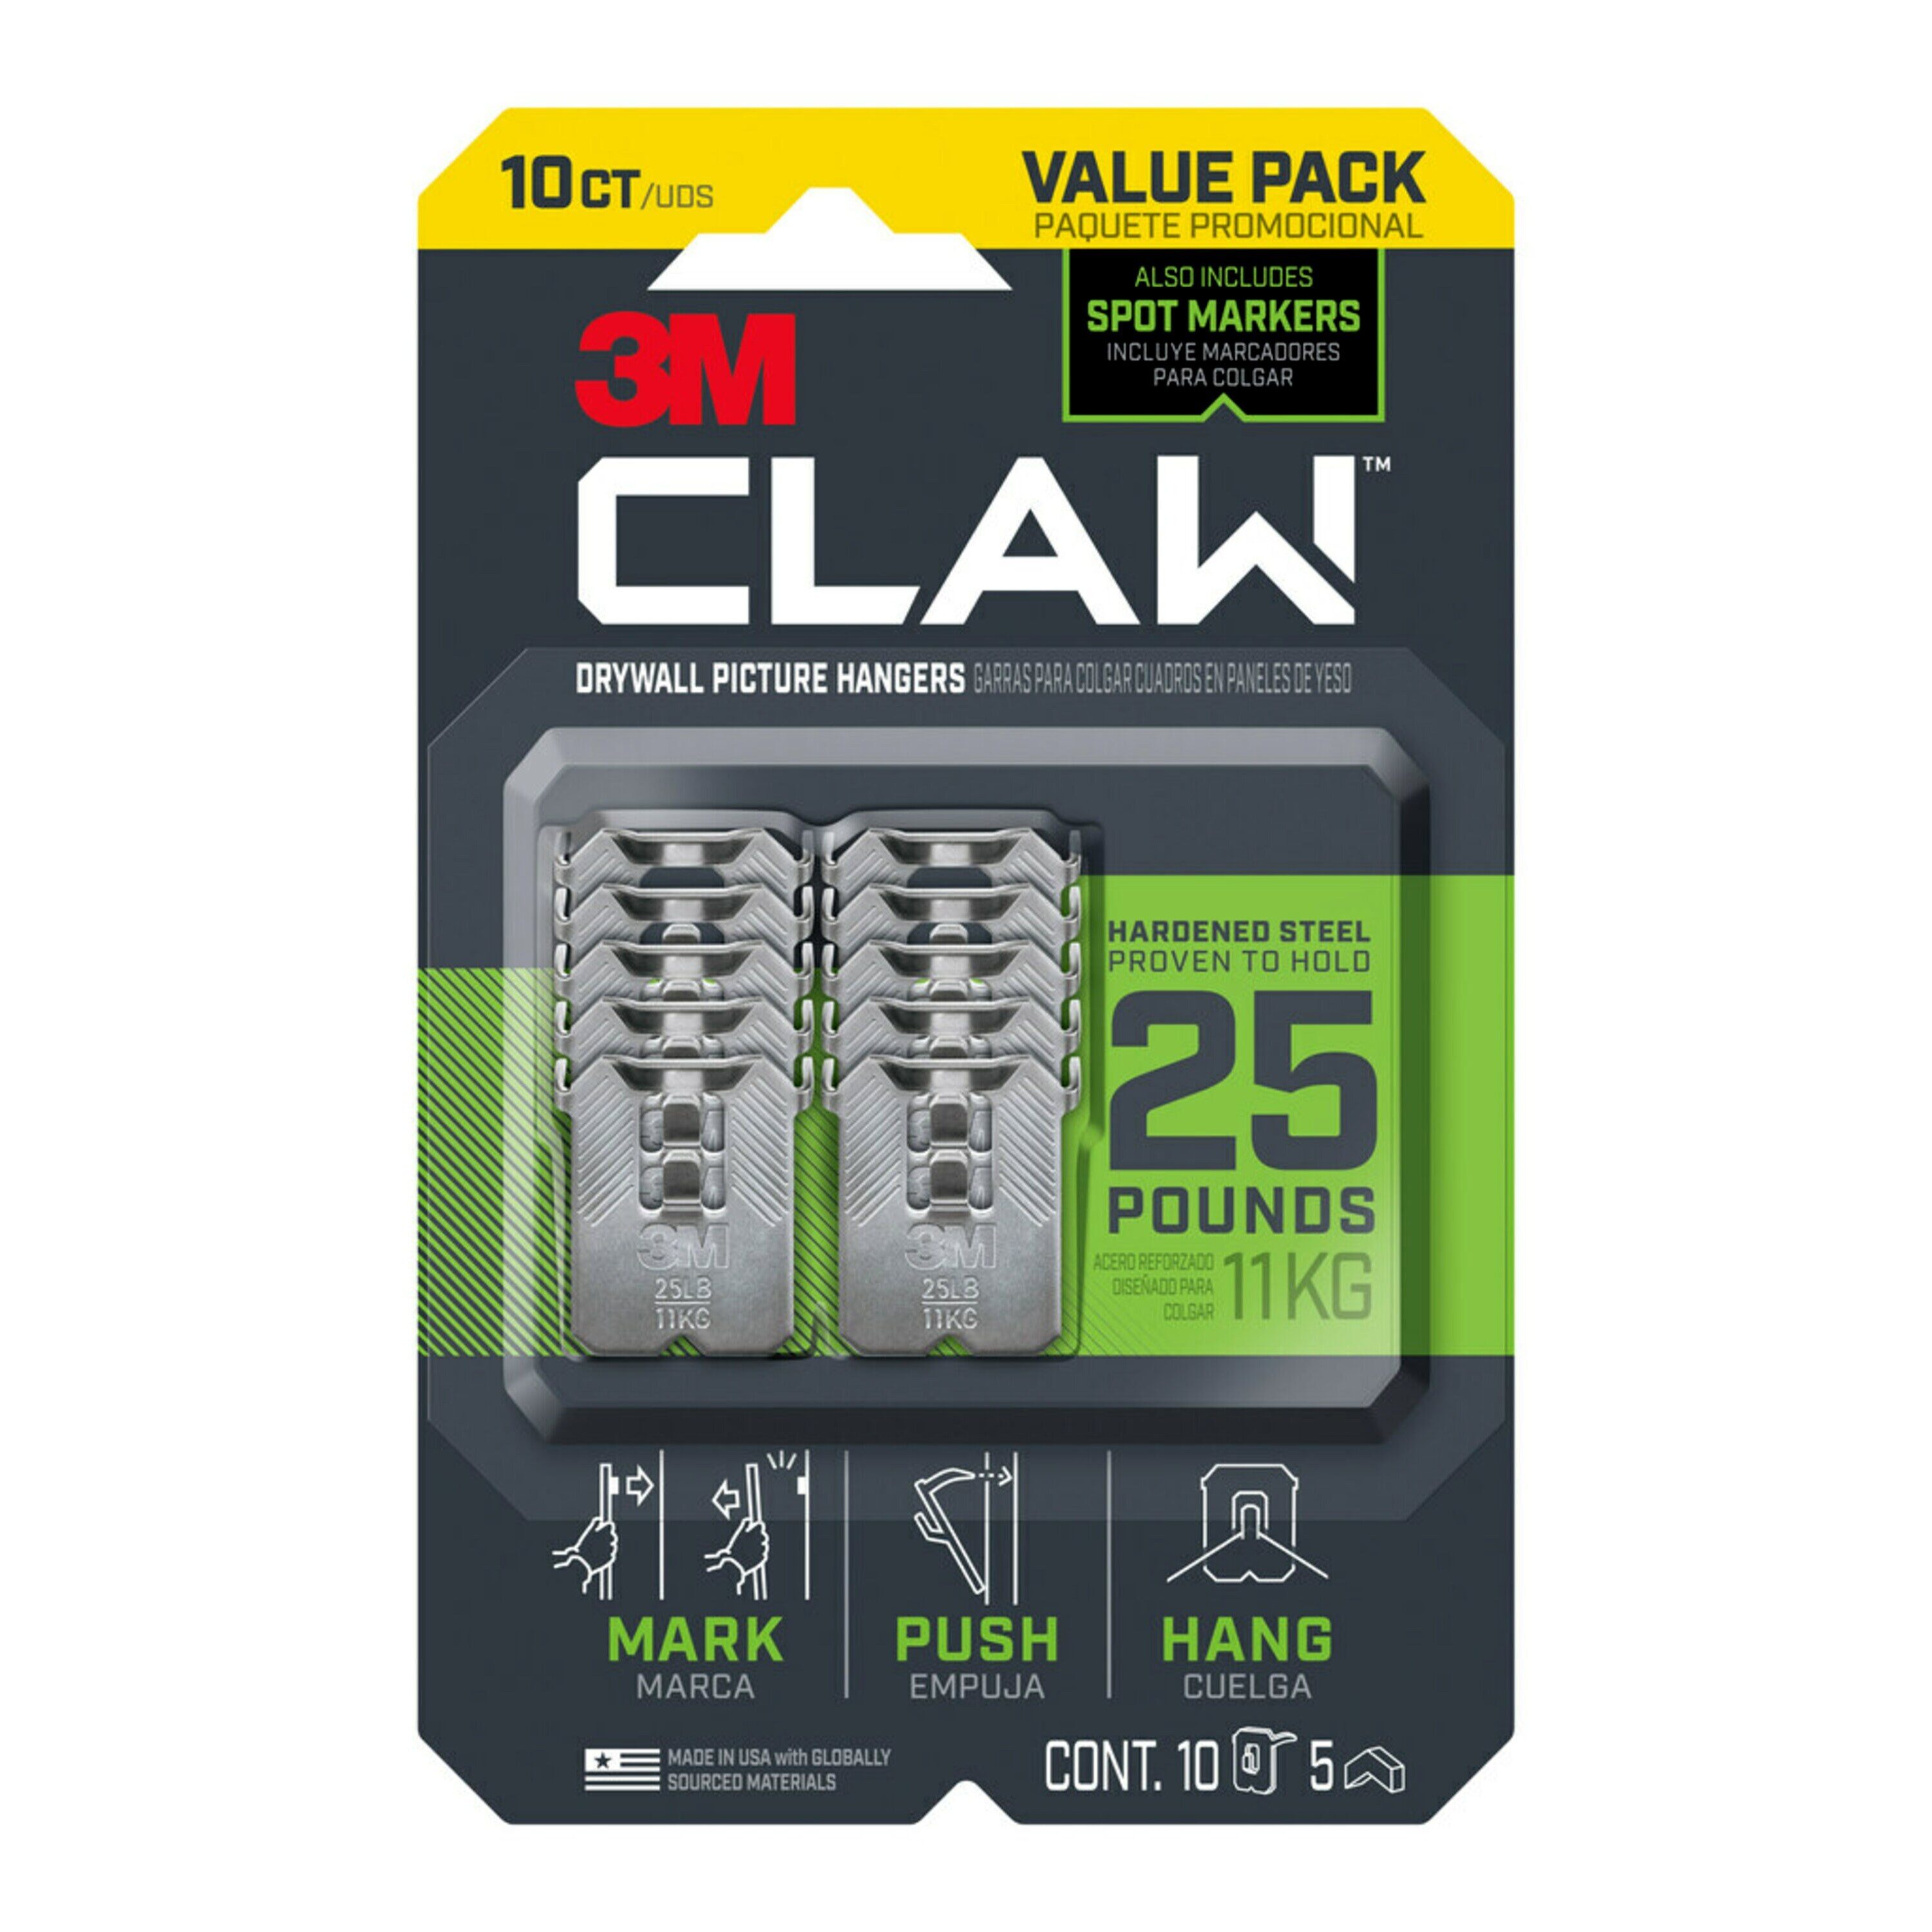 3M CLAW Drywall Picture Hanger With Temporary Spot Marker, Assorted, 8 Hangers, 8 Markers/Pack